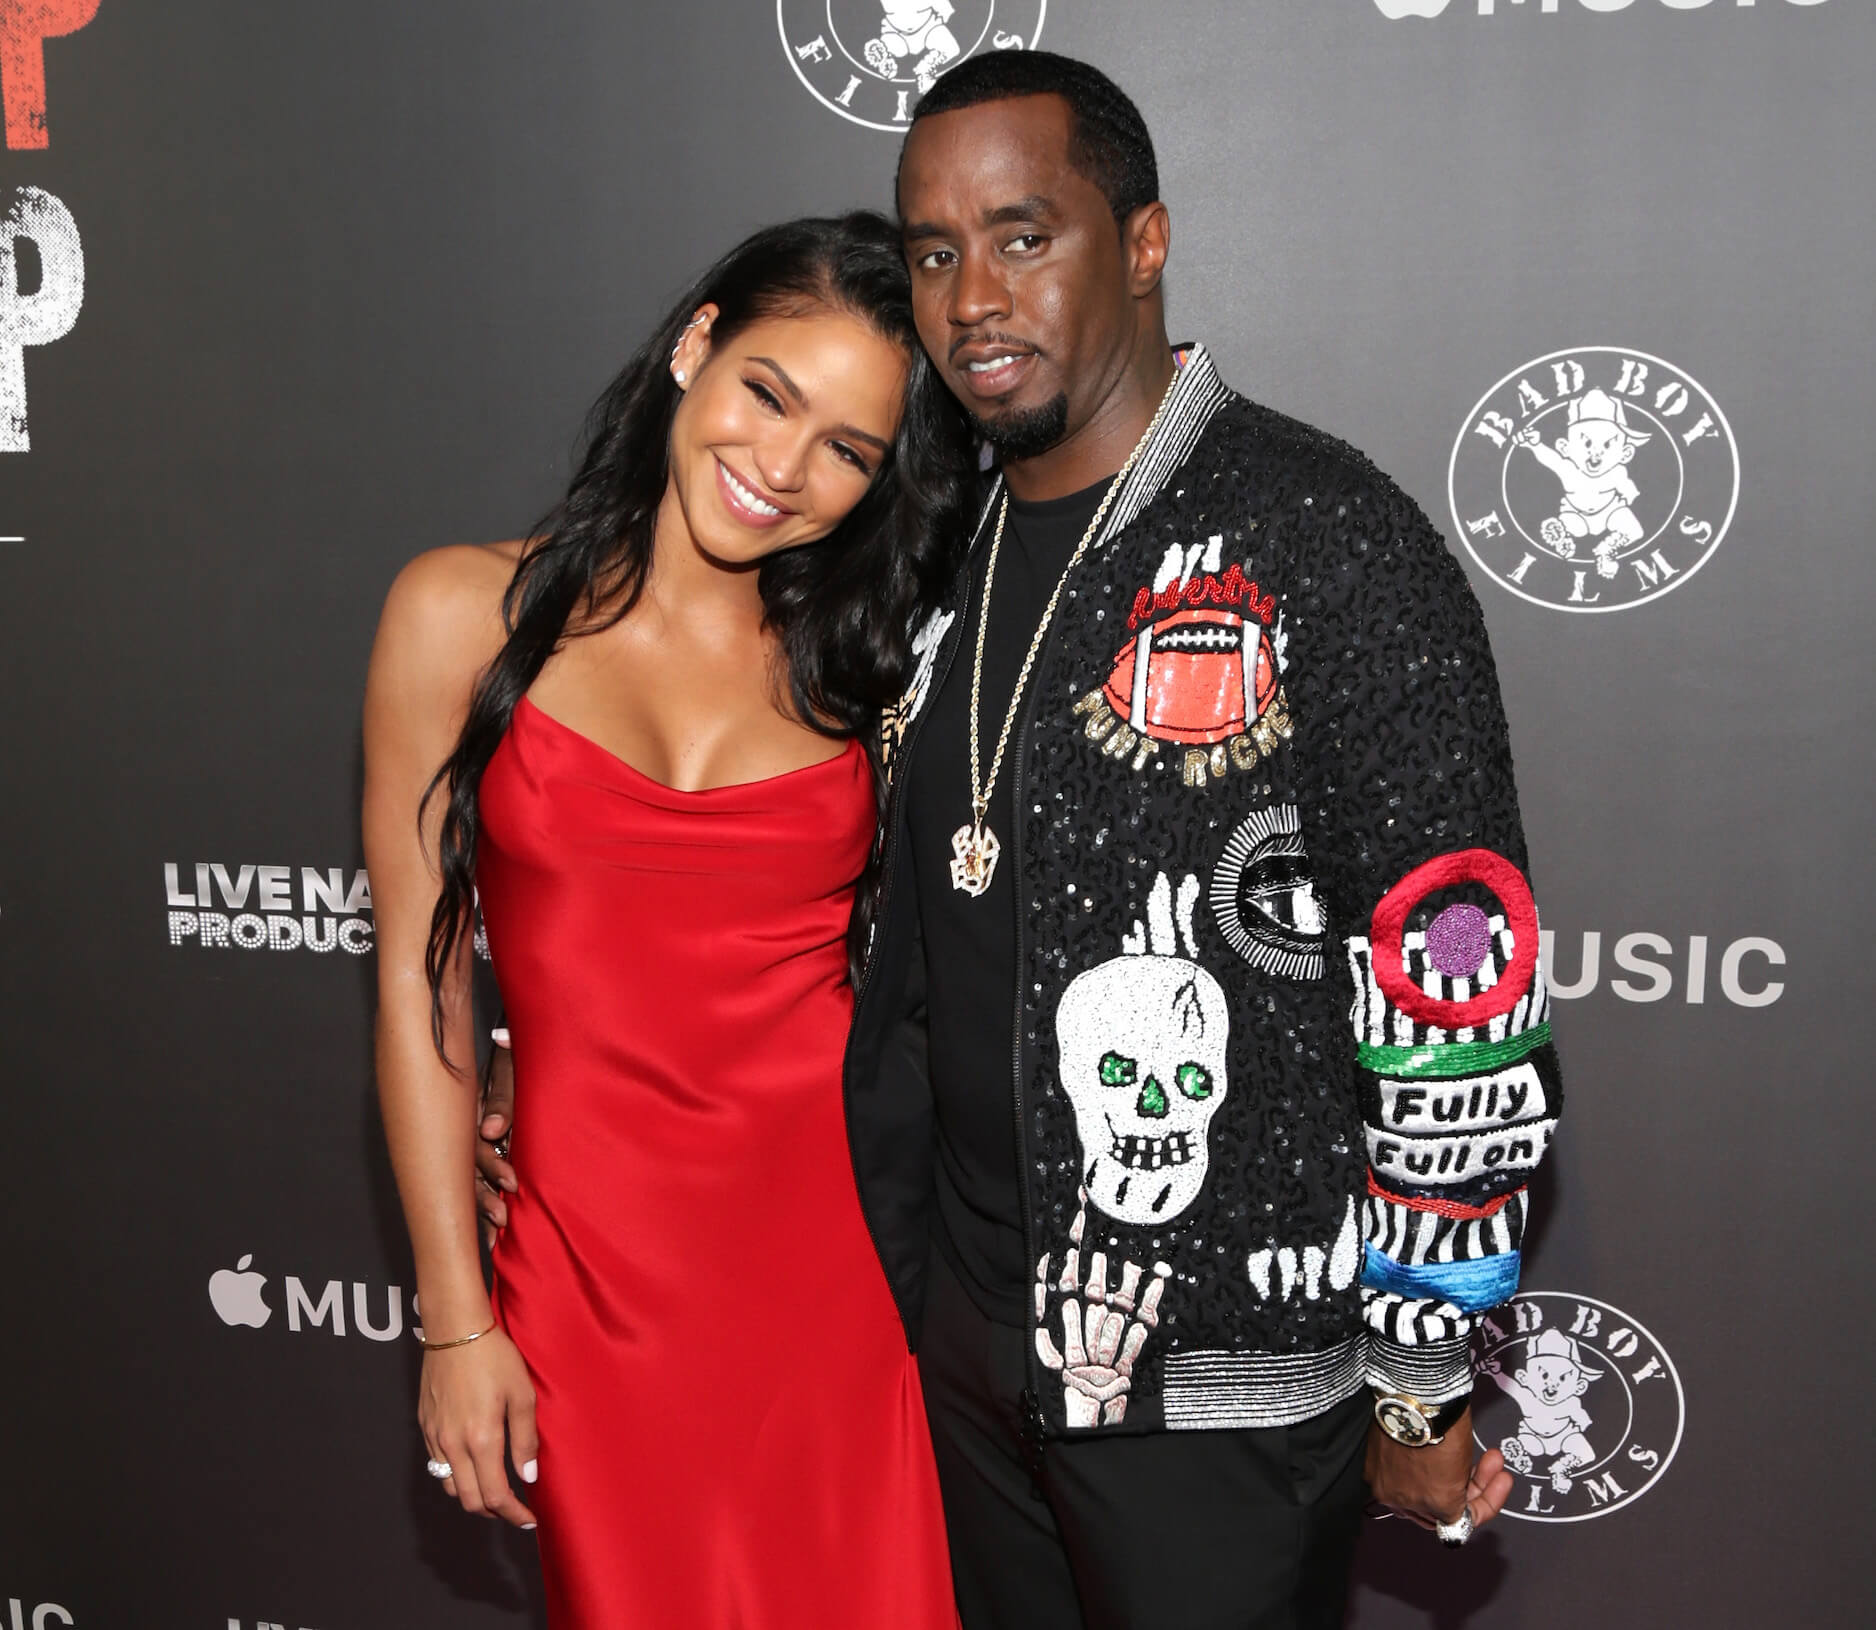 Casandra 'Cassie' Ventura smiling with her head on Sean 'P. Diddy' Combs' shoulder at an event